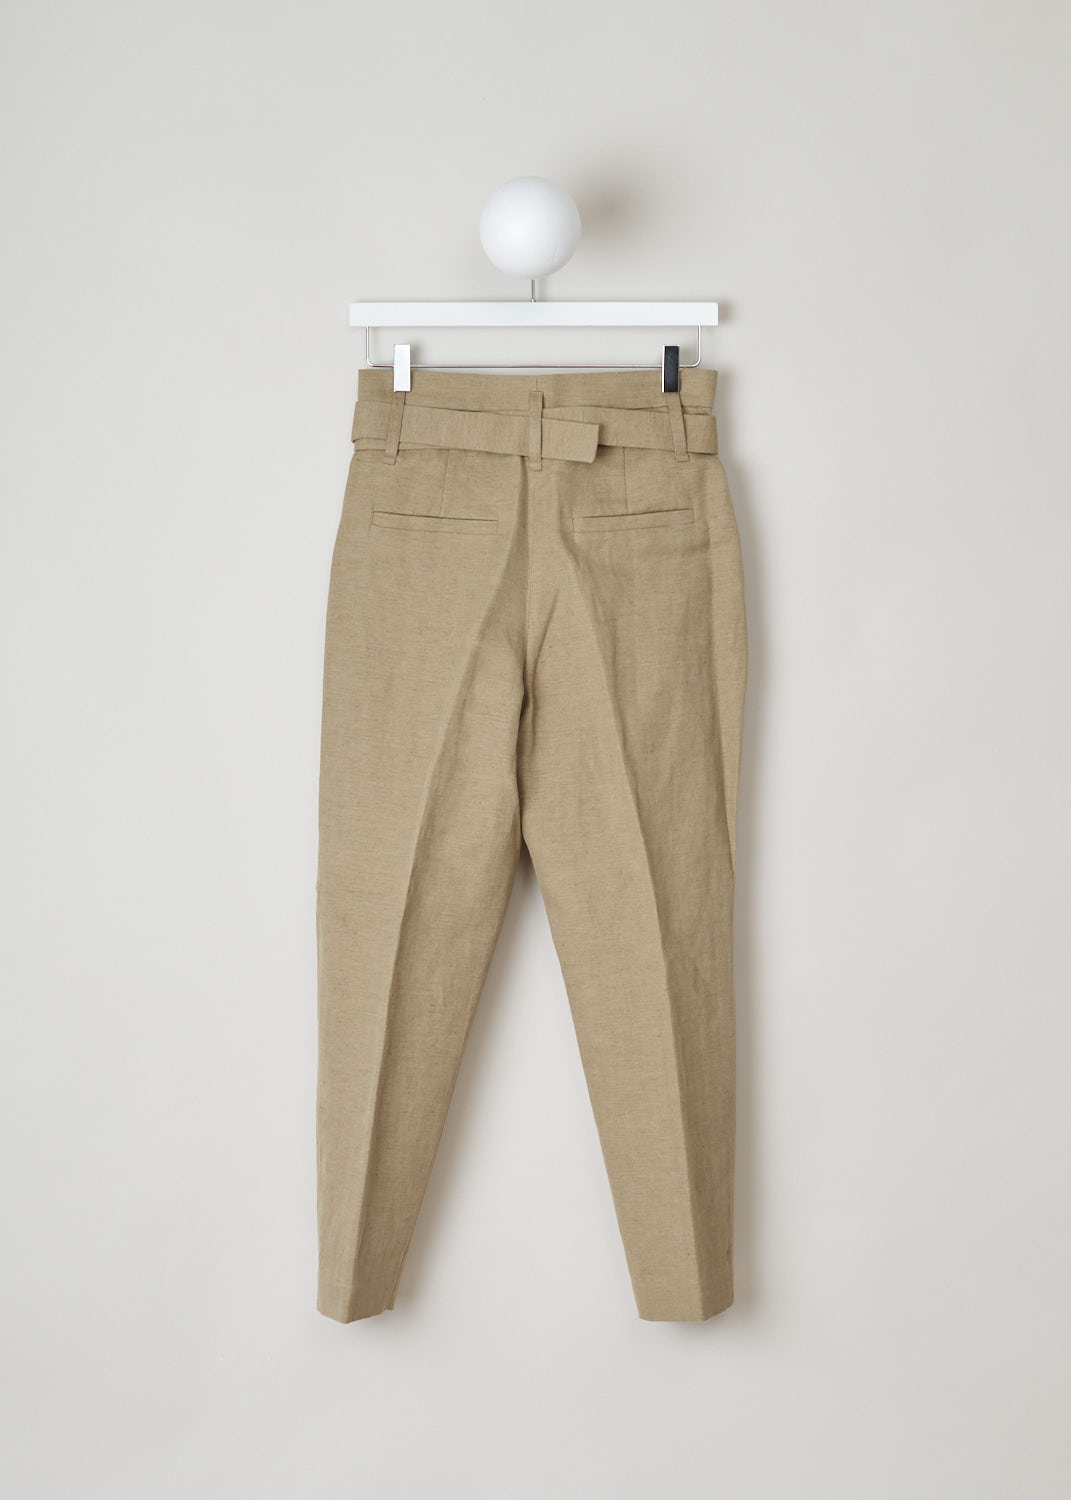 Brunello Cucinelli, high-waisted khaki paperbag pants, MF553P6588_C7178, green, back, High-waist paperbag pants, featuring a D-ring belt and forward slanted pockets. With the cropped length you can show off any shoe you are wearing. Featuring a pleated front and a zipper with a press button as your fastening option. On the back this model has two welt pockets and a elastic waistband for more comfort. 